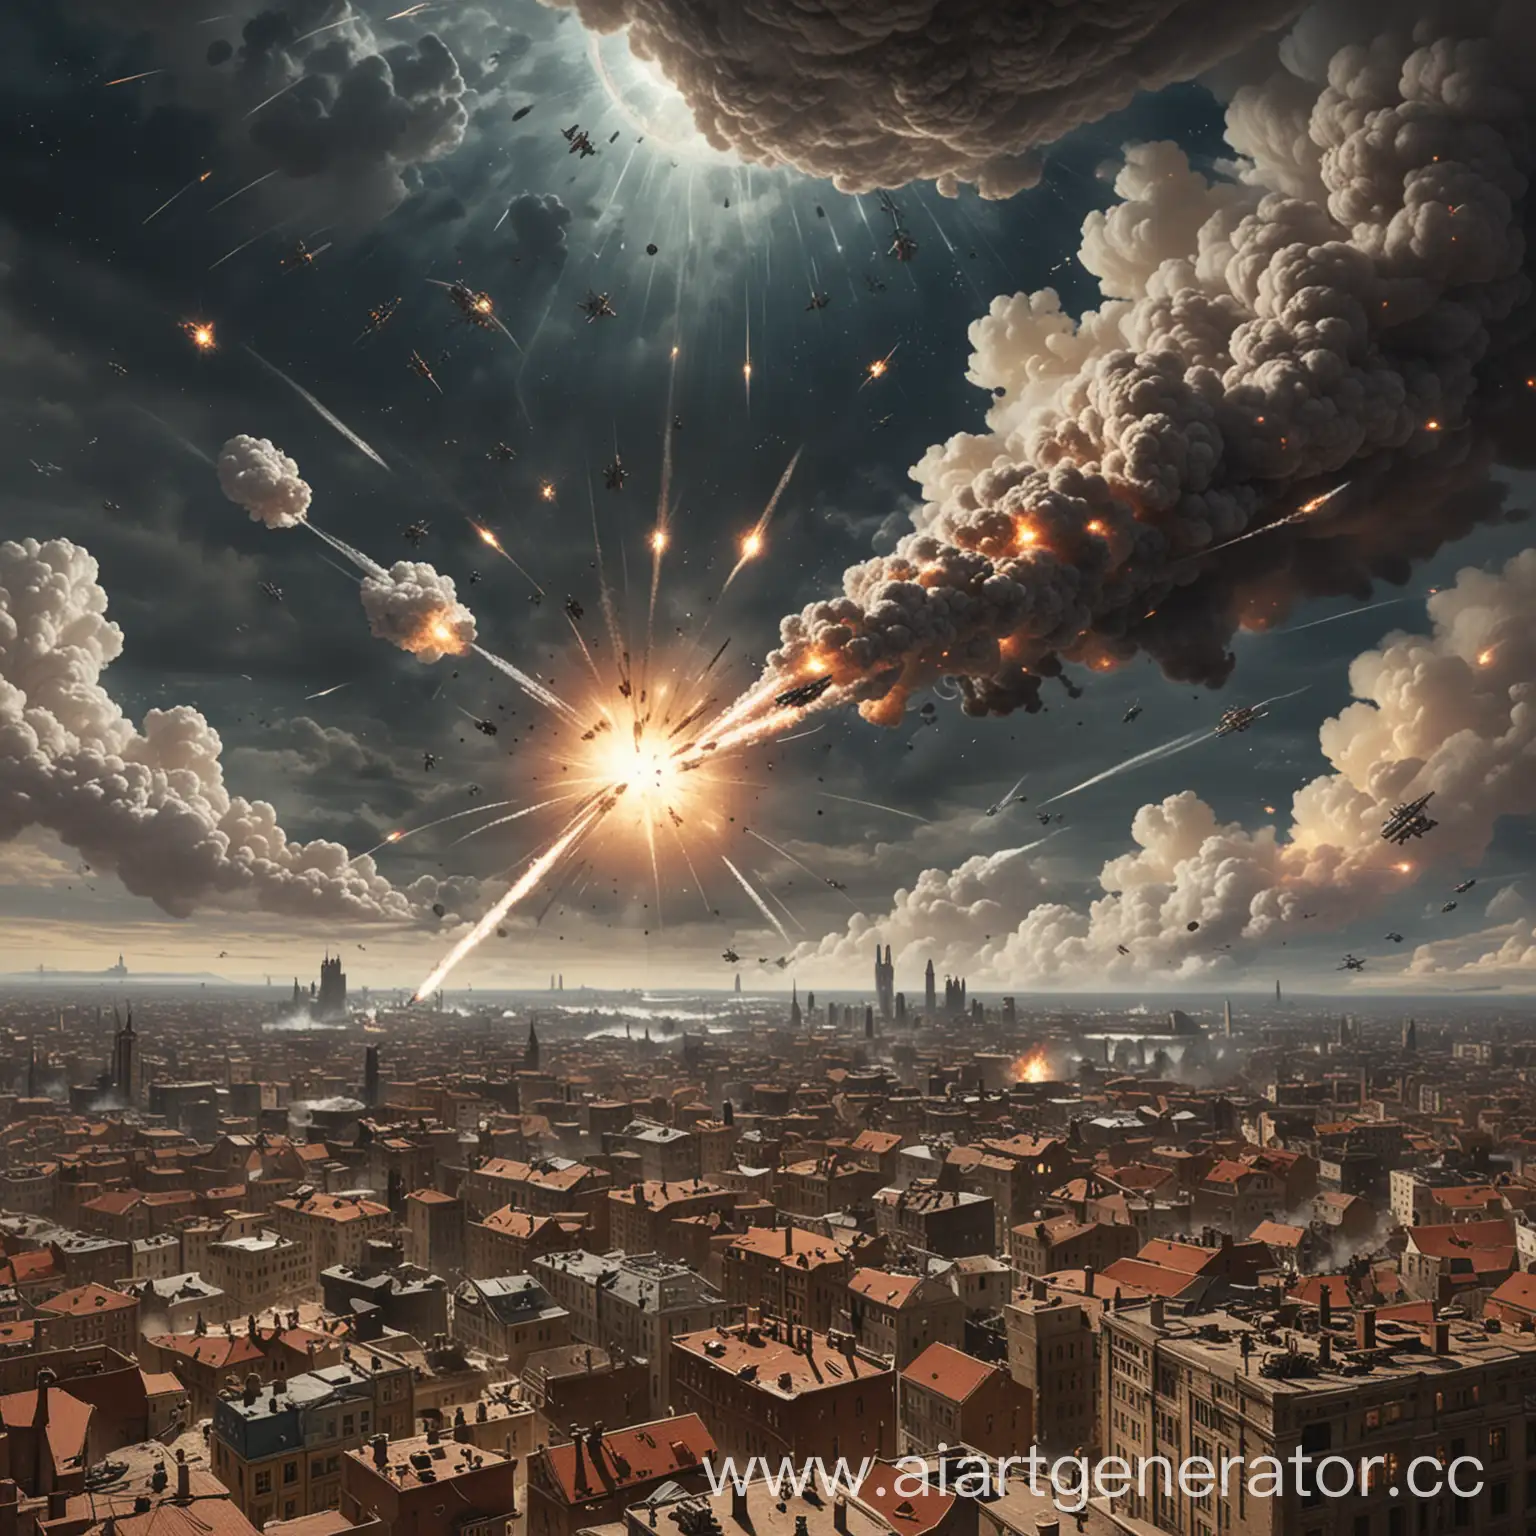 City-Bombardment-Residents-Perspective-of-Orbital-Weapons-Assault